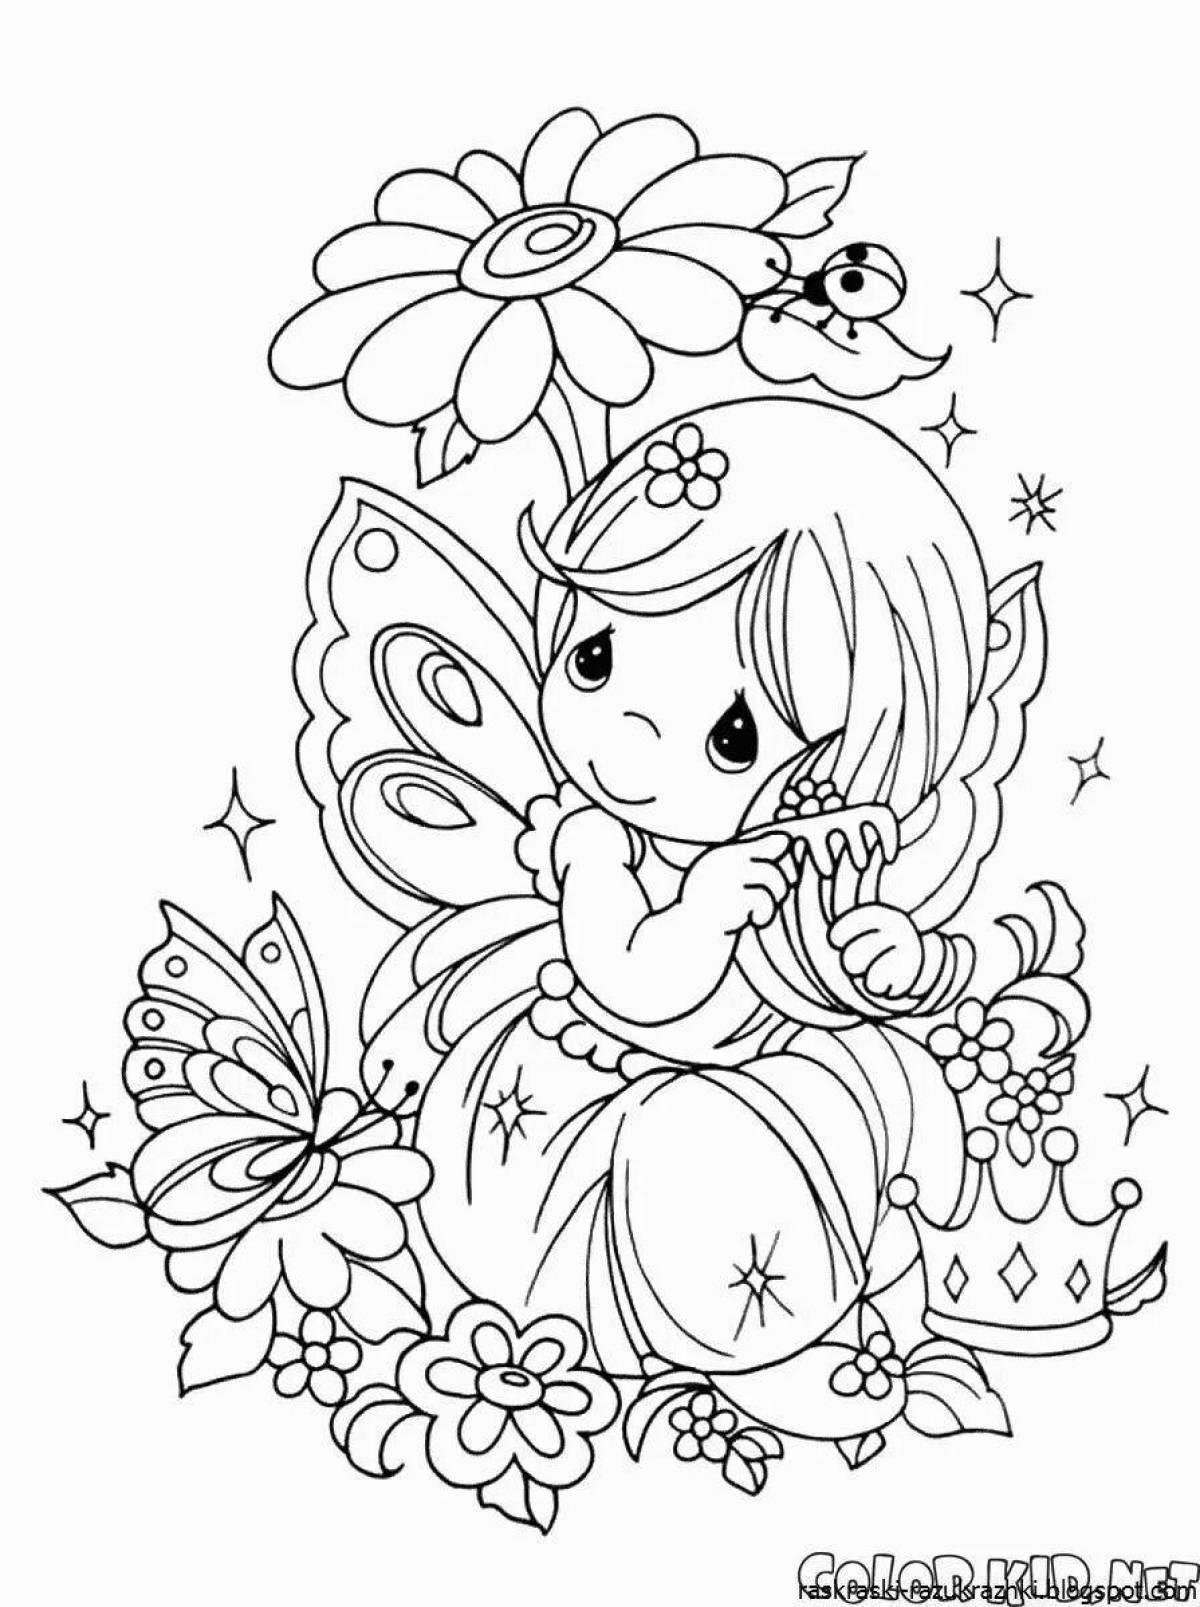 Shining beautiful coloring book for girls 5 years old